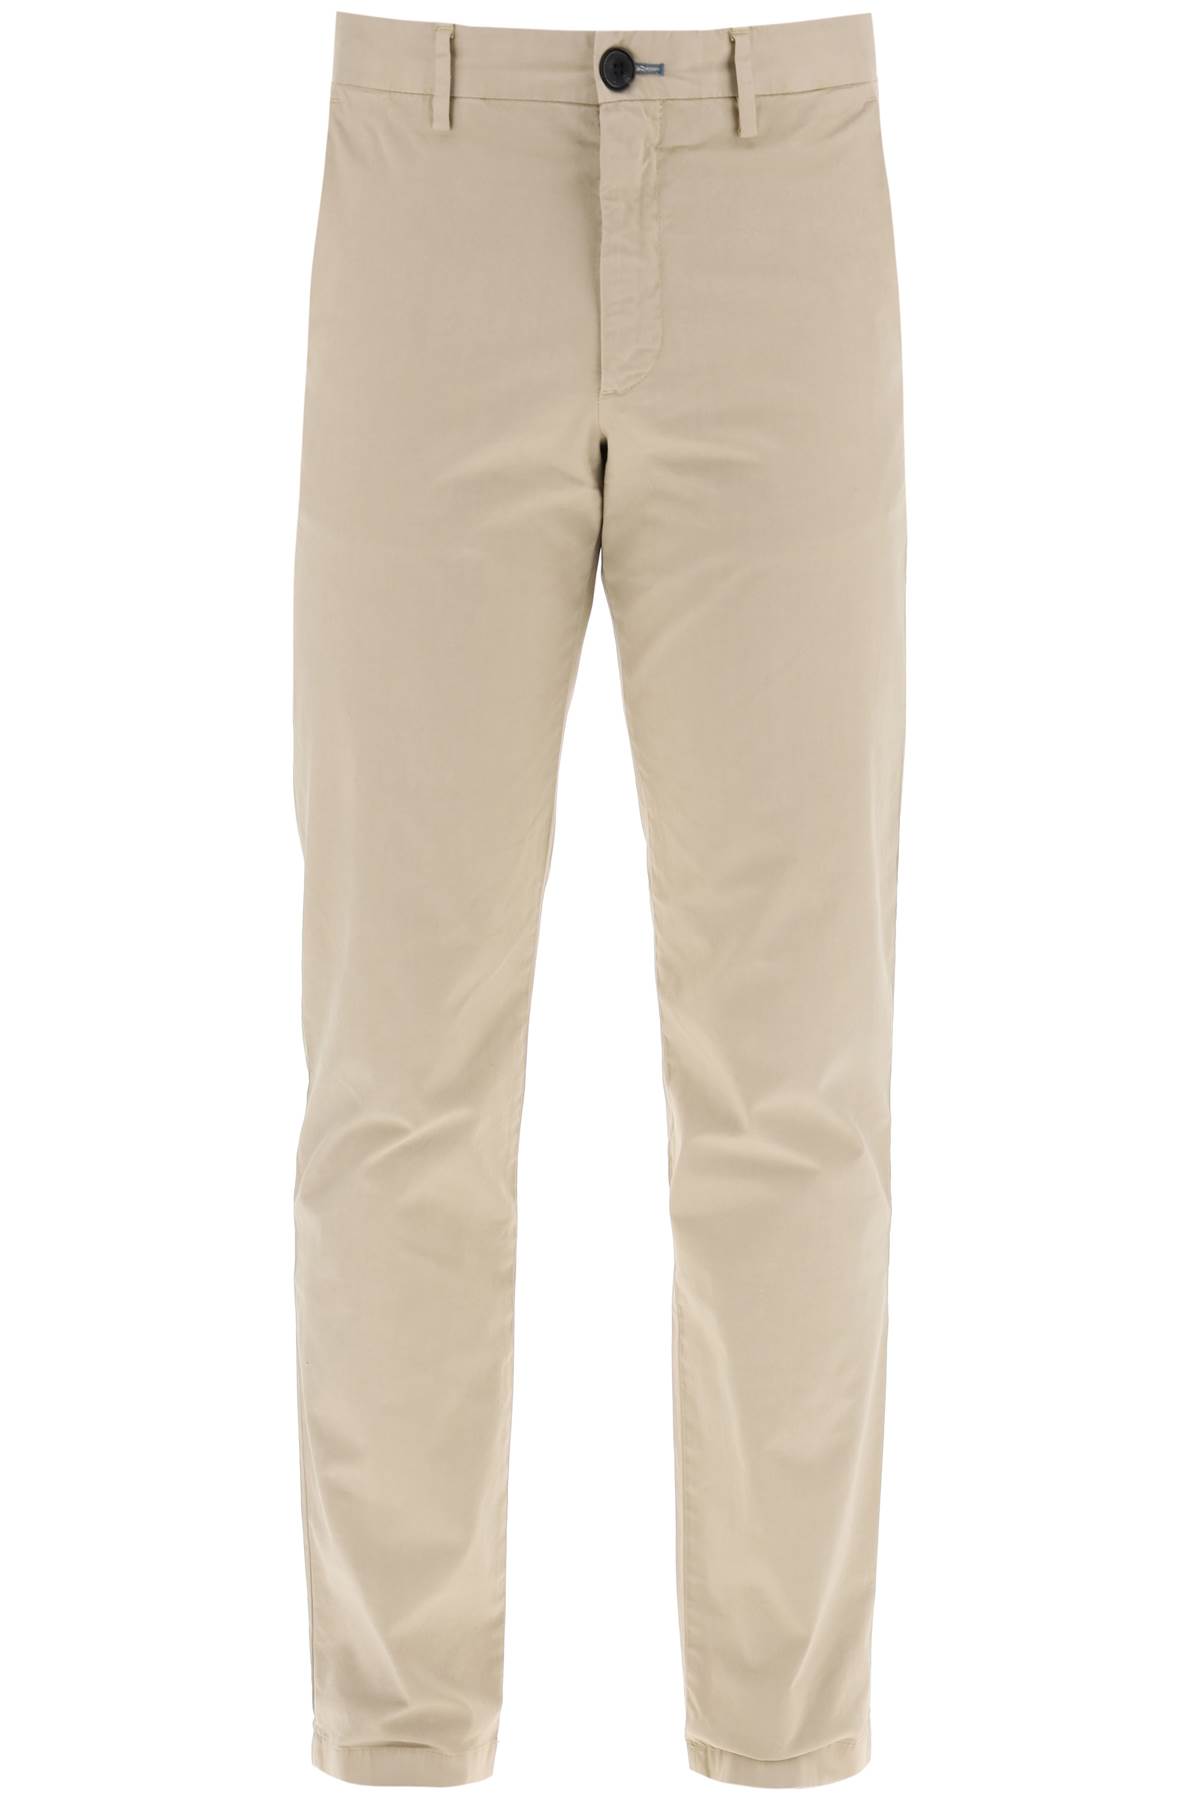 Cotton Stretch Chino Pants For